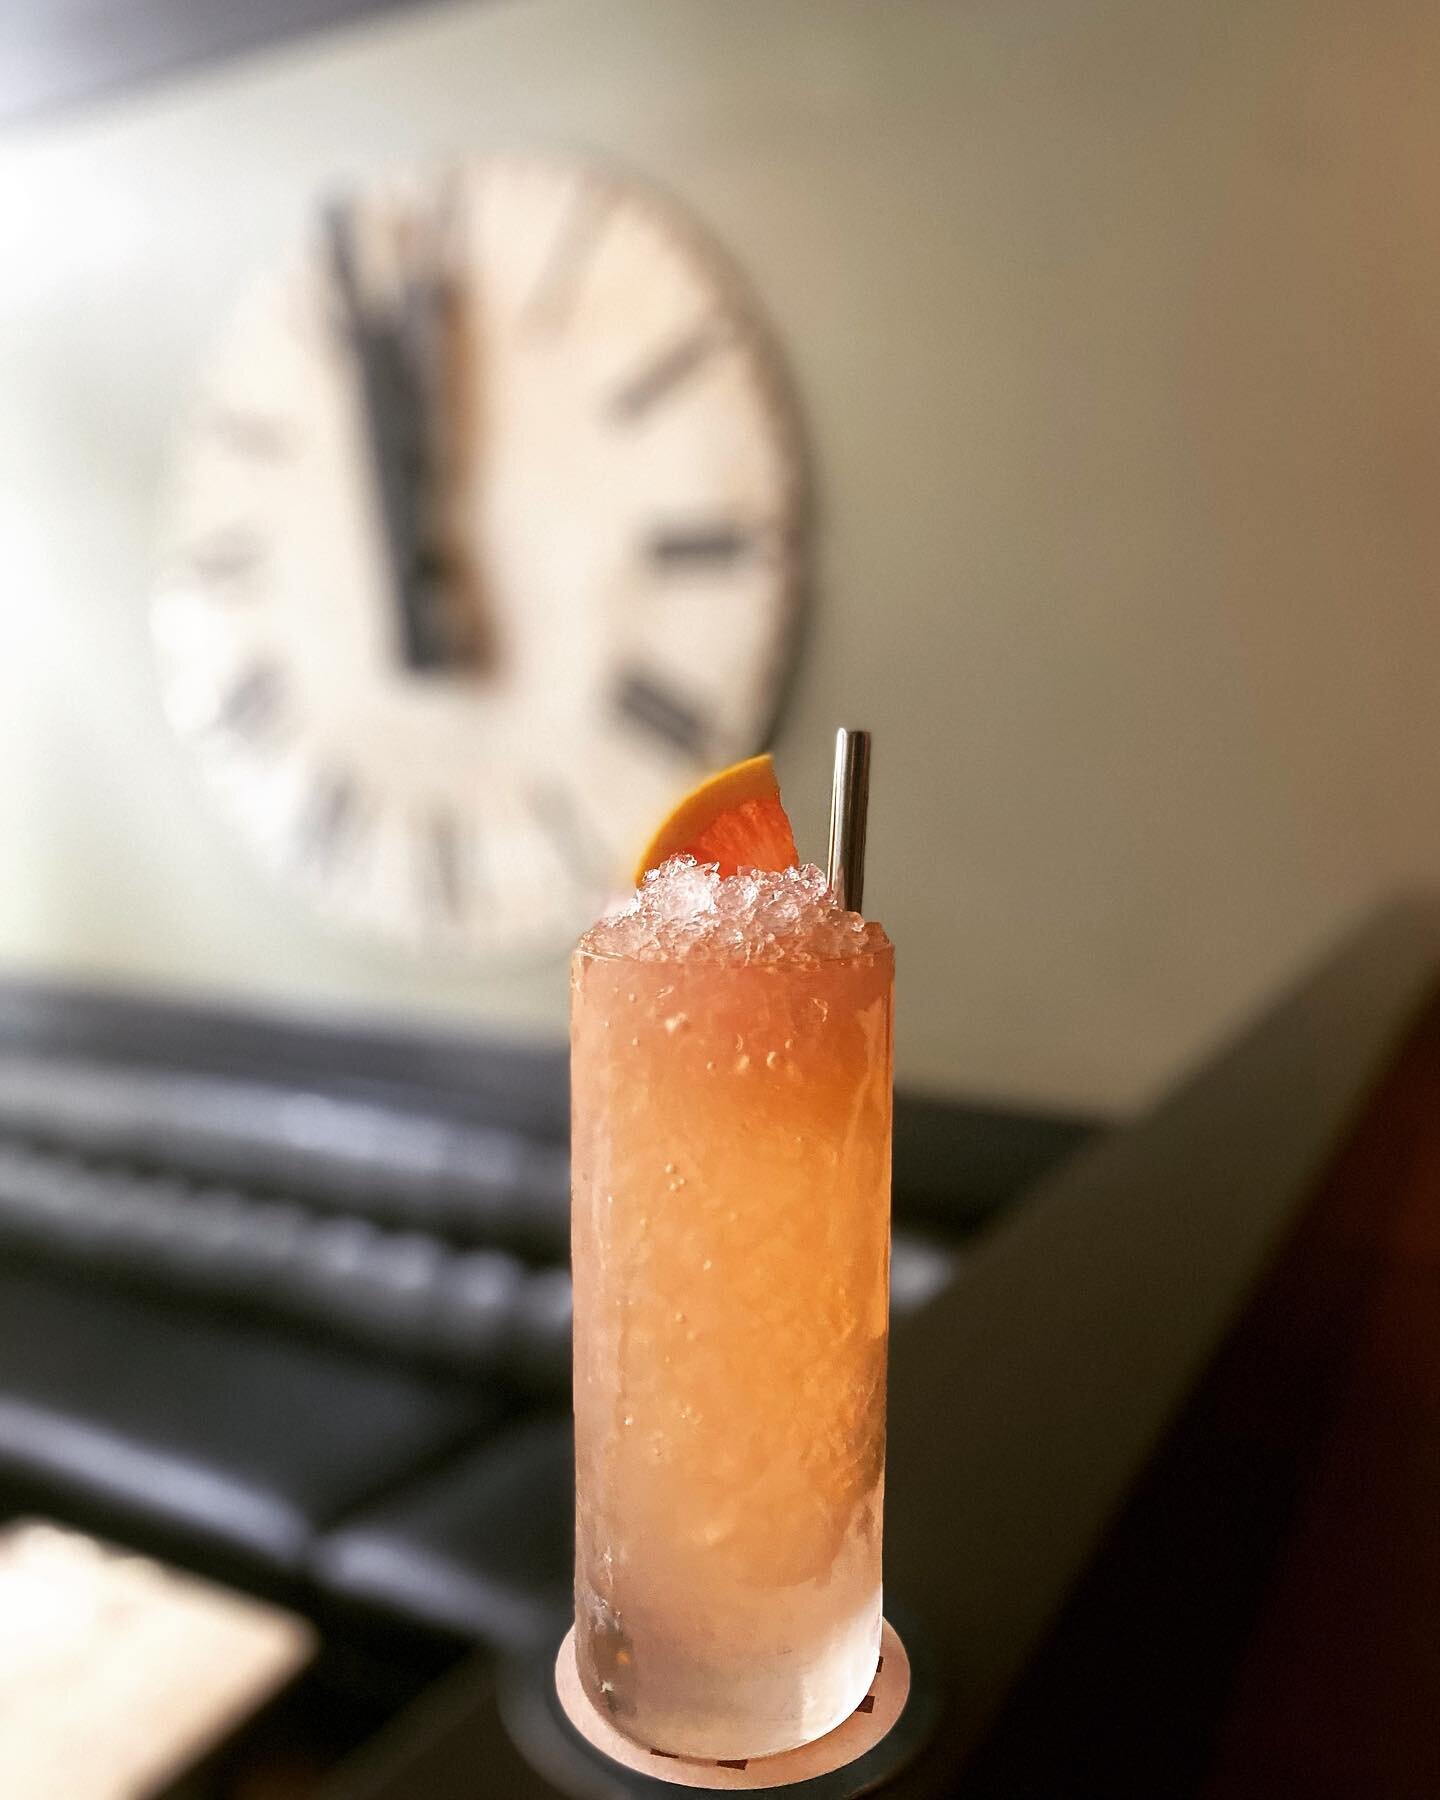 New week new cocktail !

- La Tequilera
Lo siento tequila
grapefruit
Cointreau
Topo chico